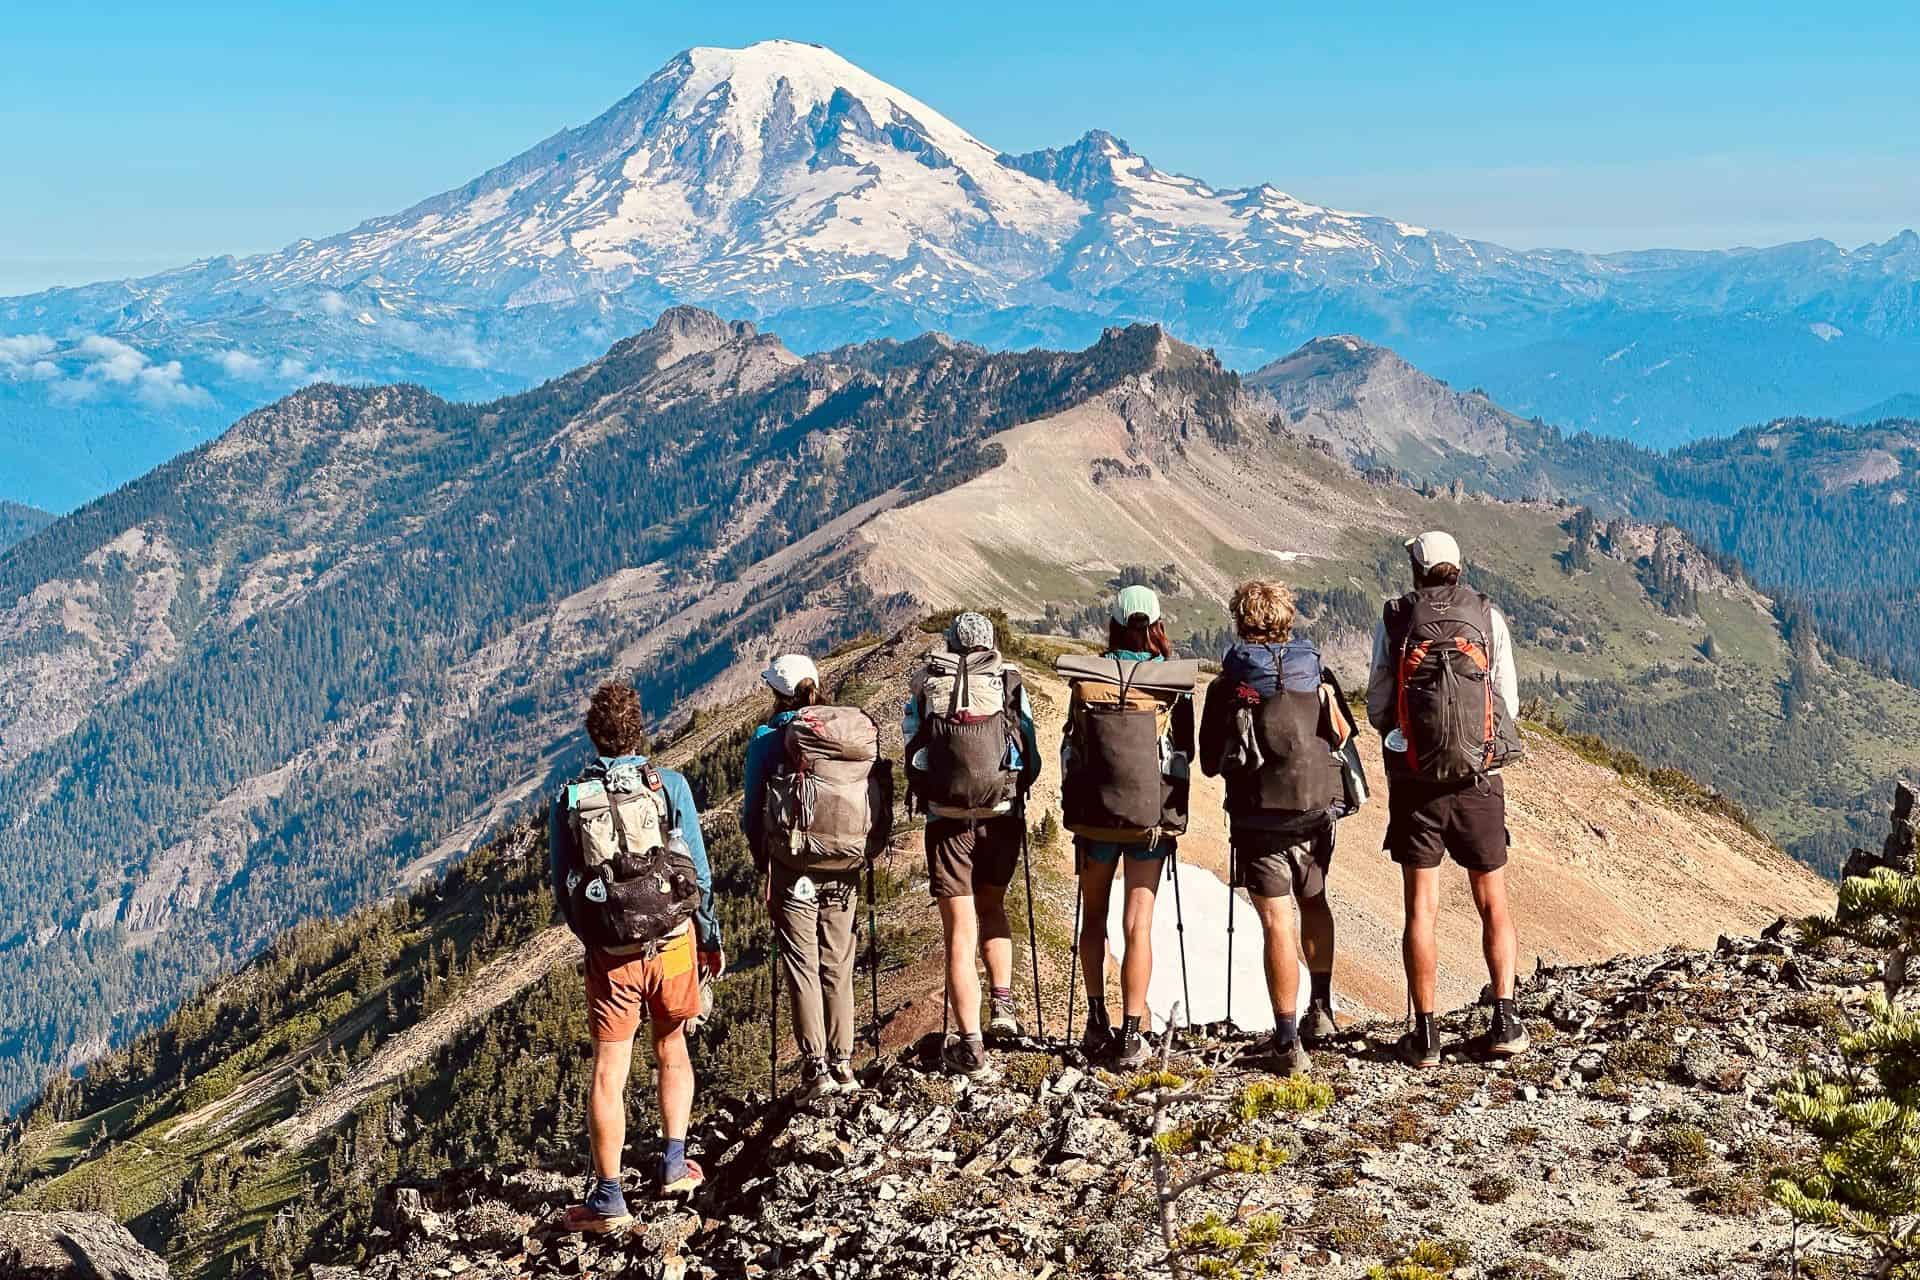 A group of hikers standing in a line and looking at a snow-capped mountain in the distance